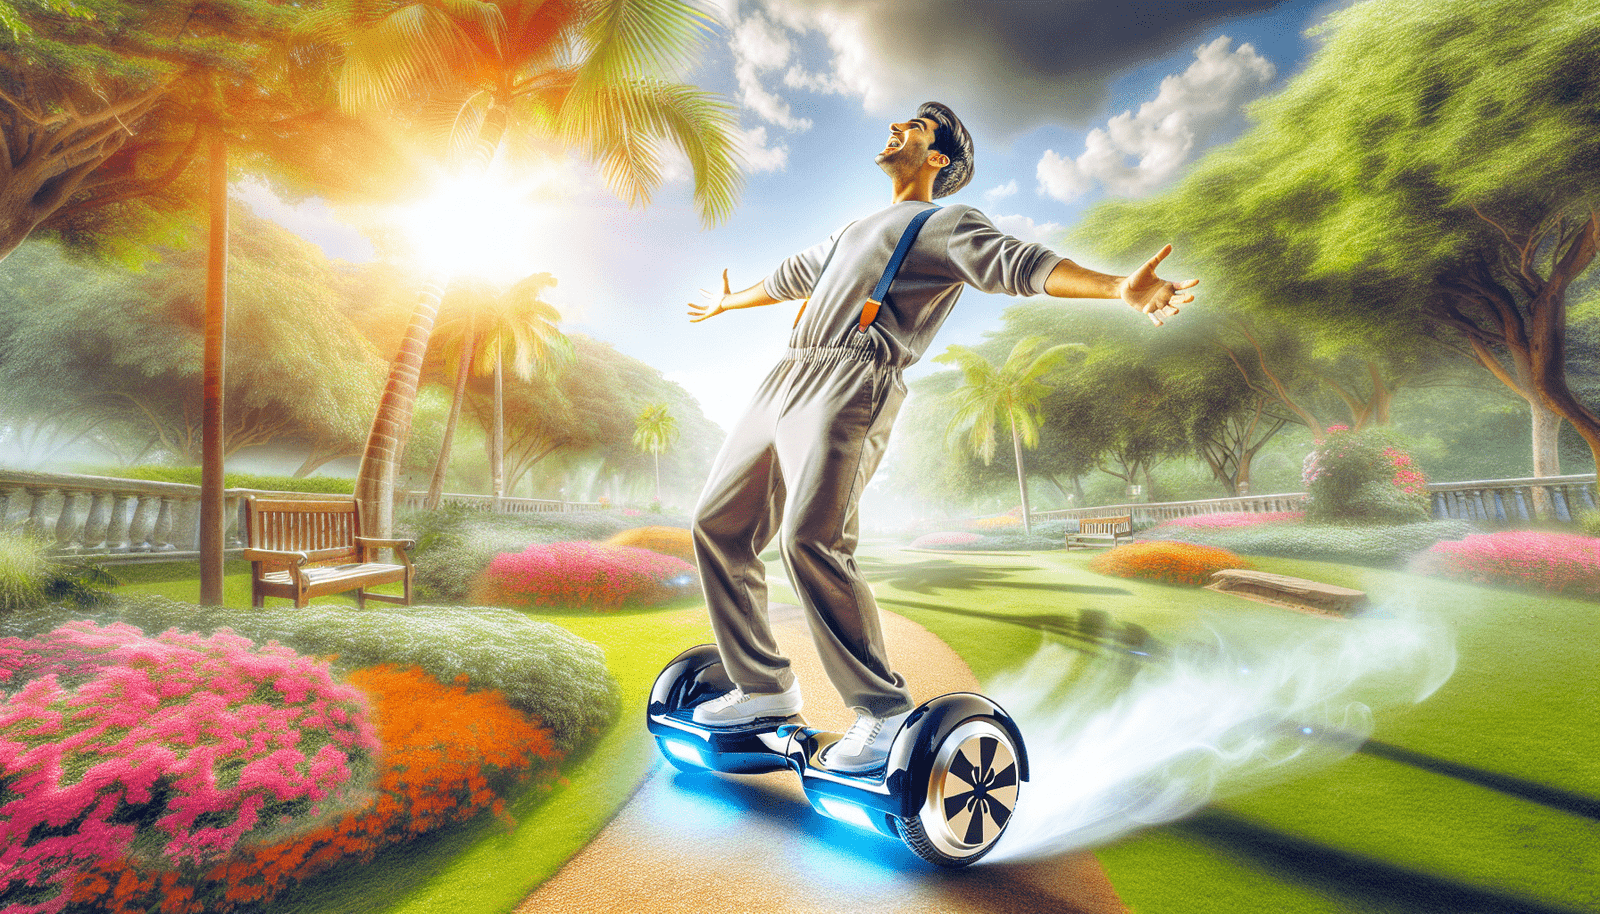 Can I Use A Hoverboard For Recreational Purposes Like Riding In Parks?